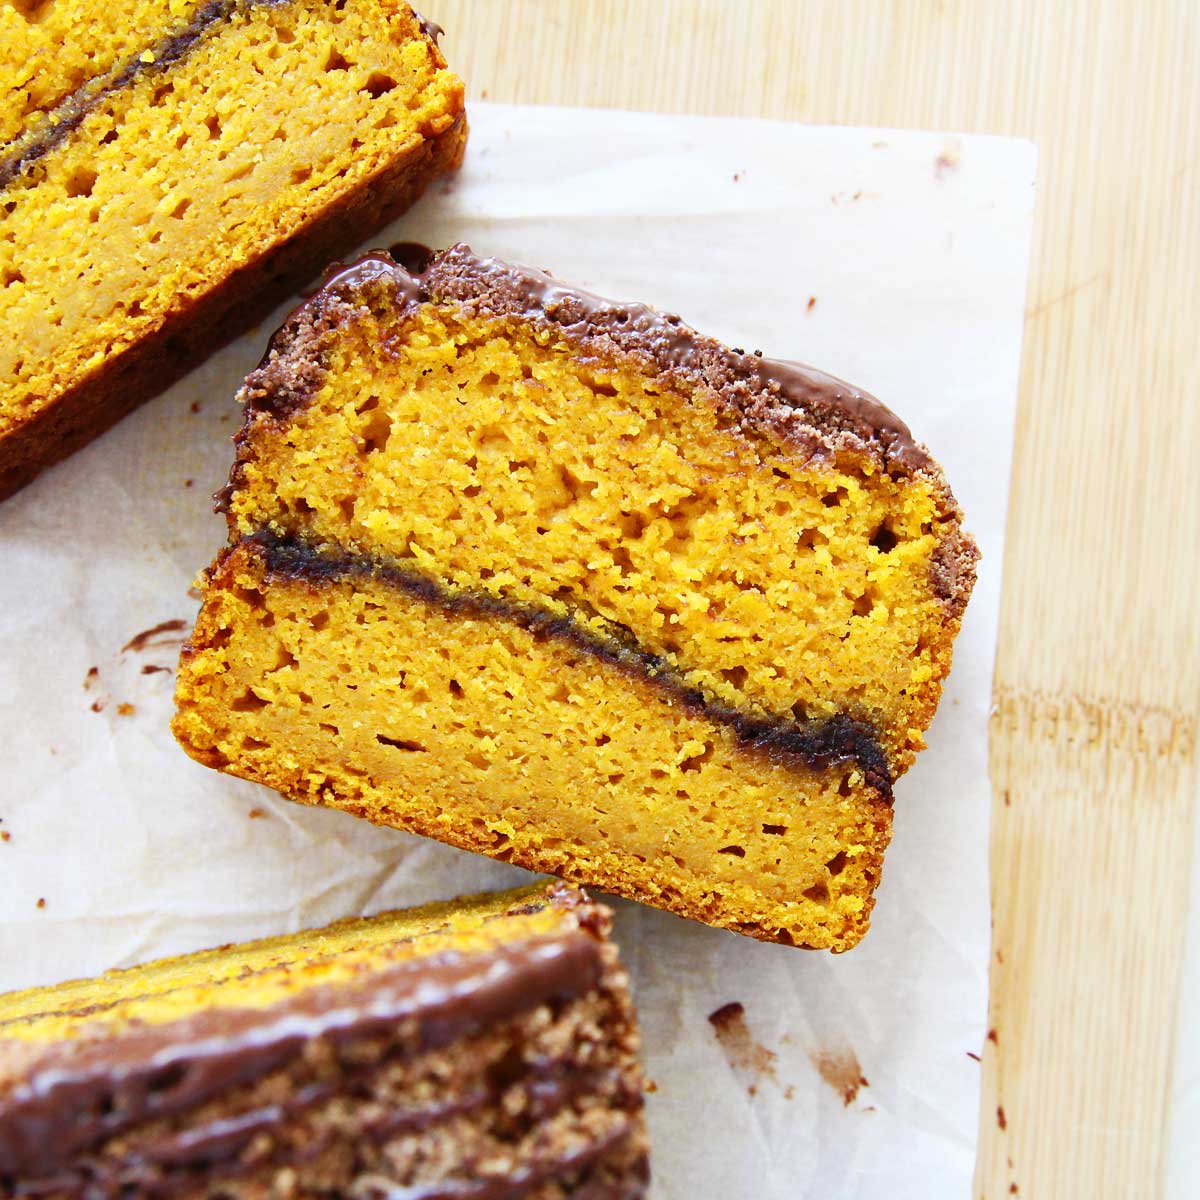 Nutella Swirl Pumpkin Bread with Chocolate Crumble Topping - Pumpkin Chocolate Frosting